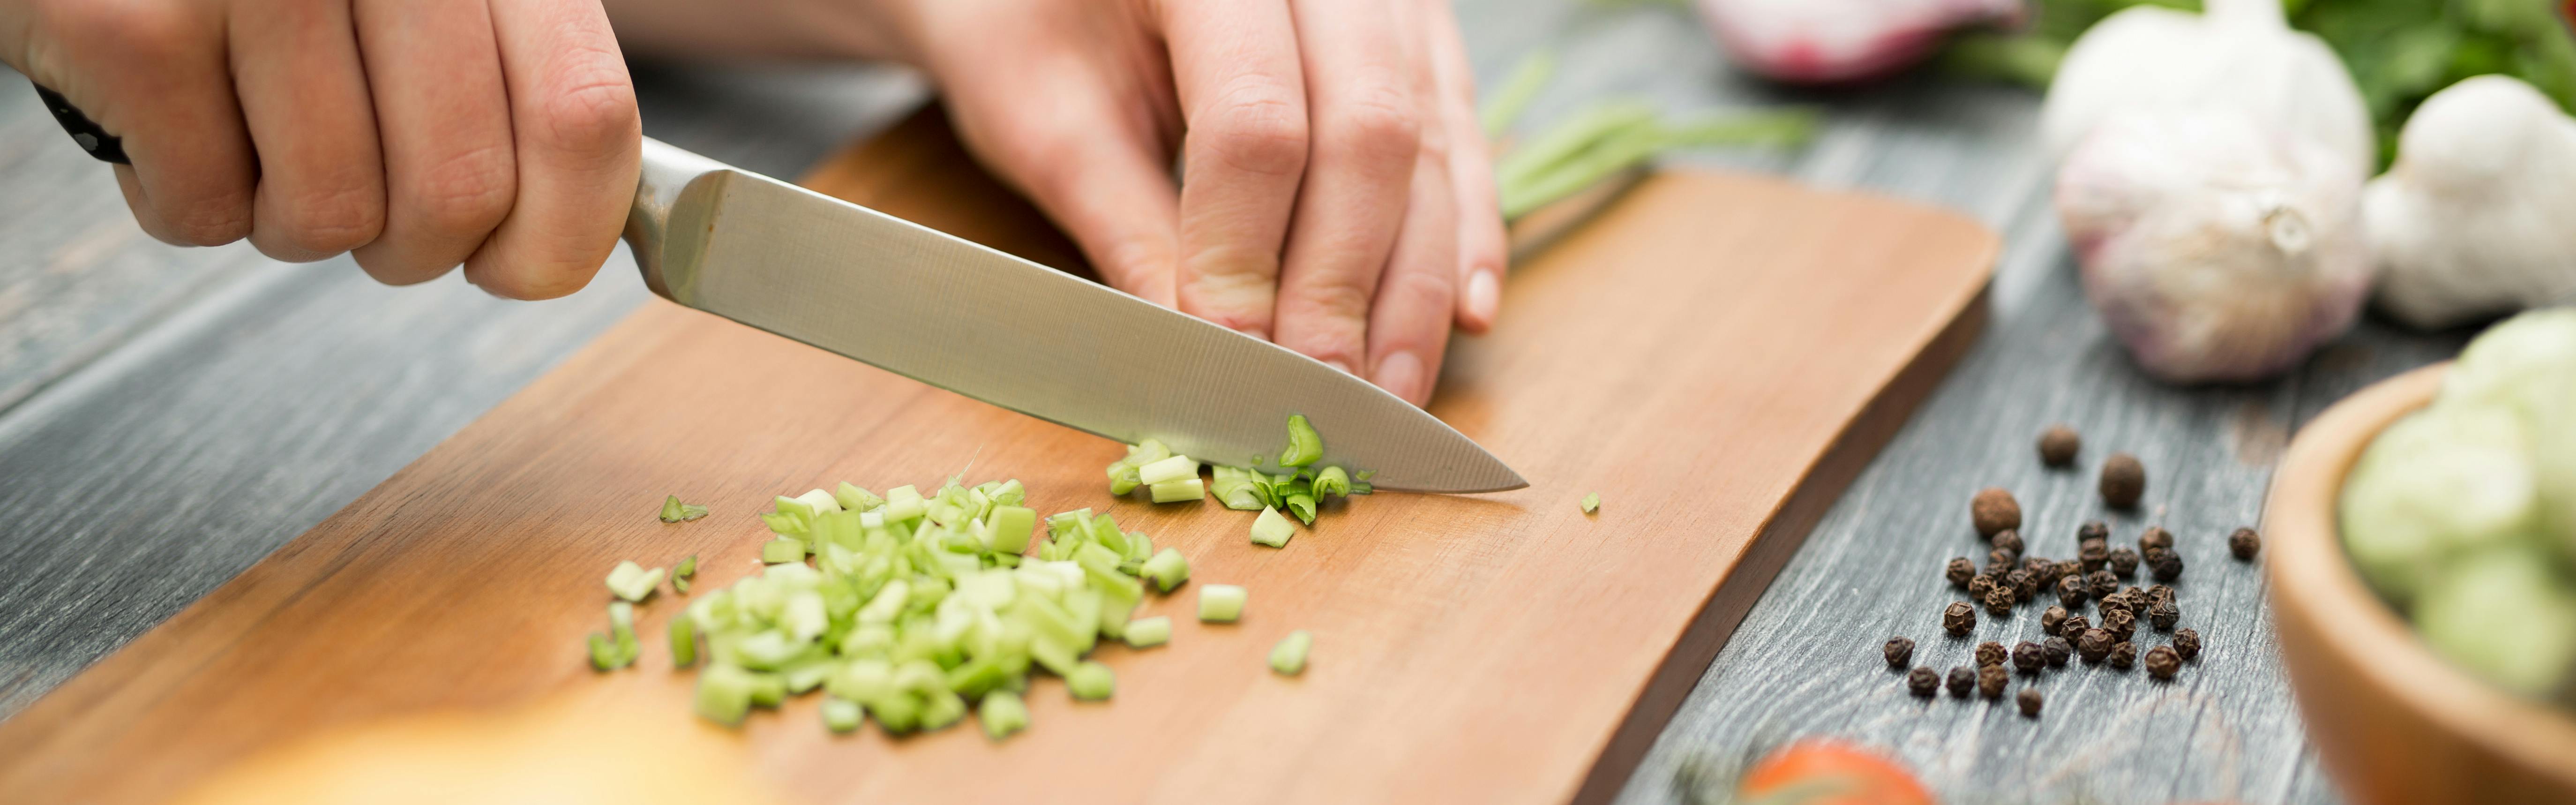 Close up of someone chopping green onions on a cutting board.